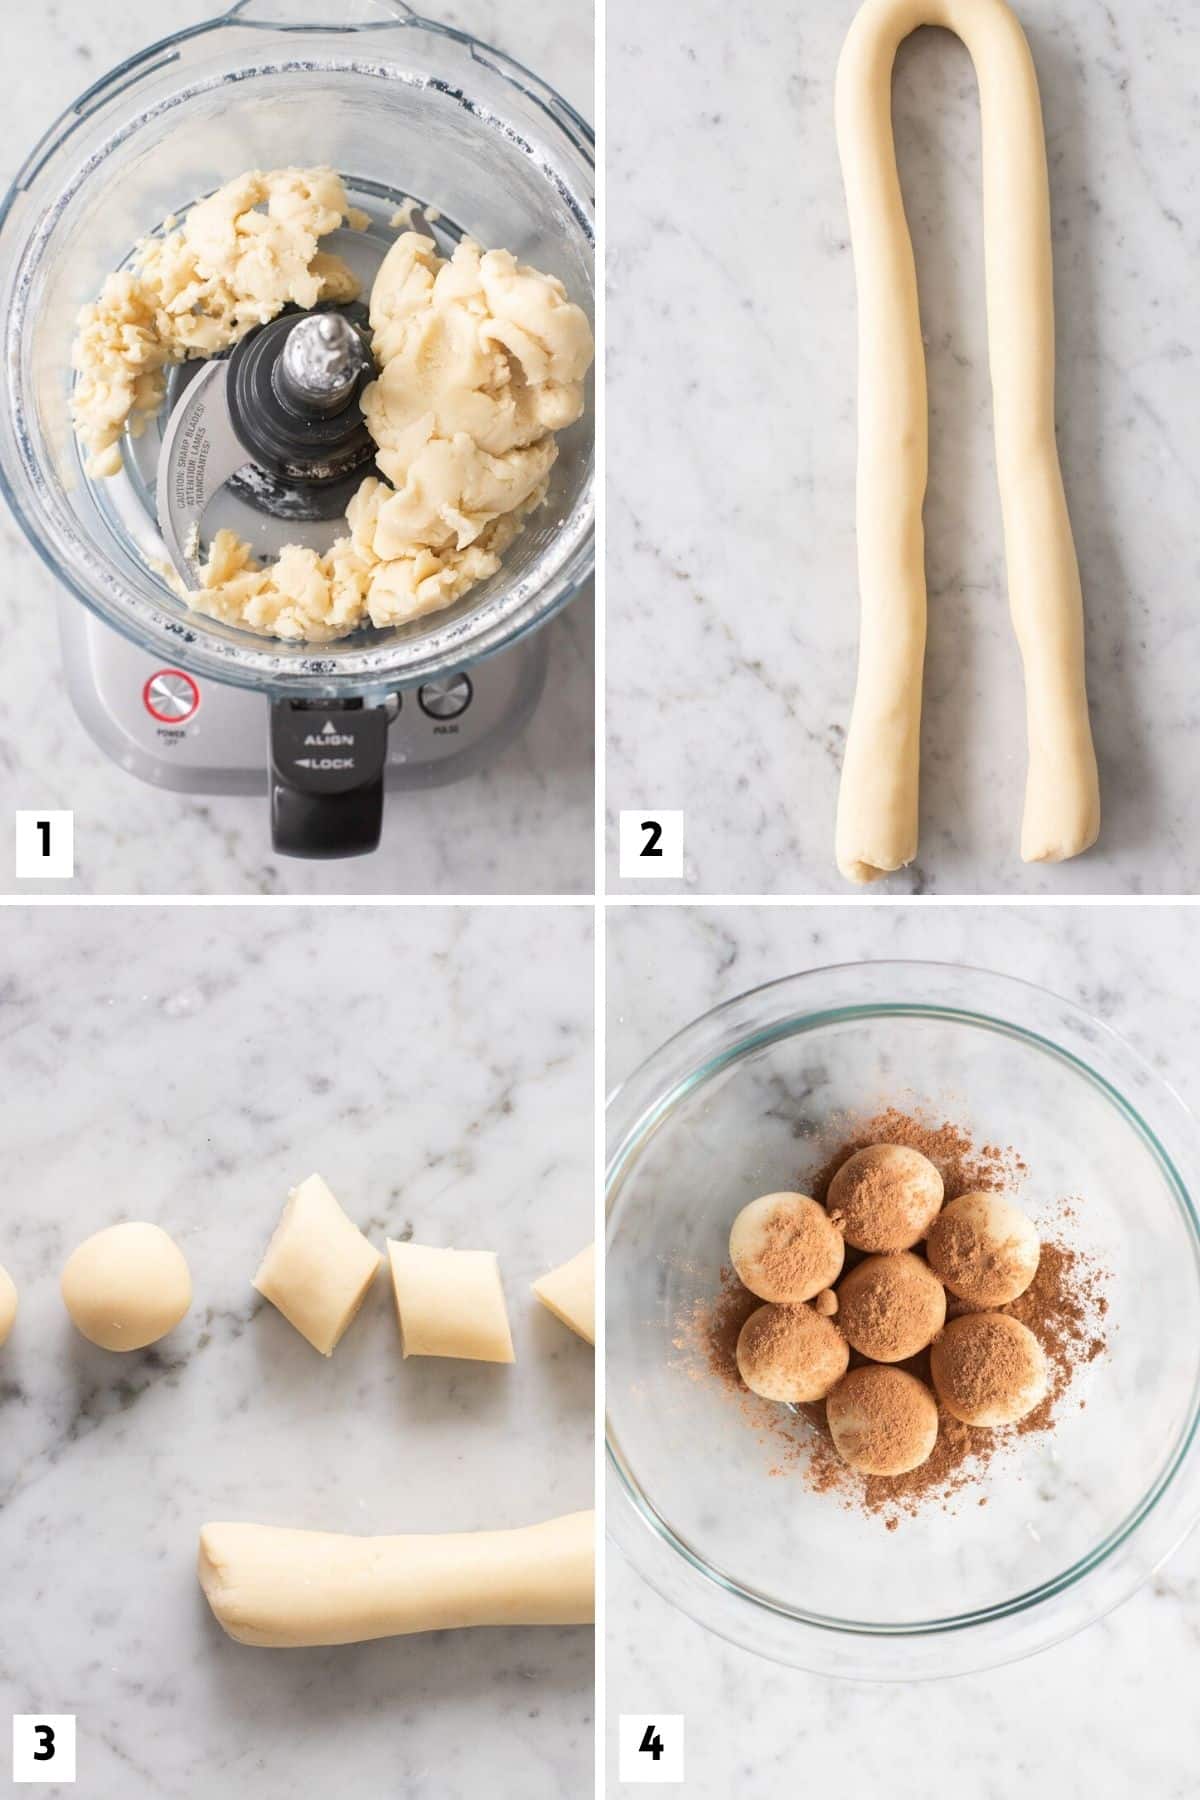 Steps for making German marzipan candy